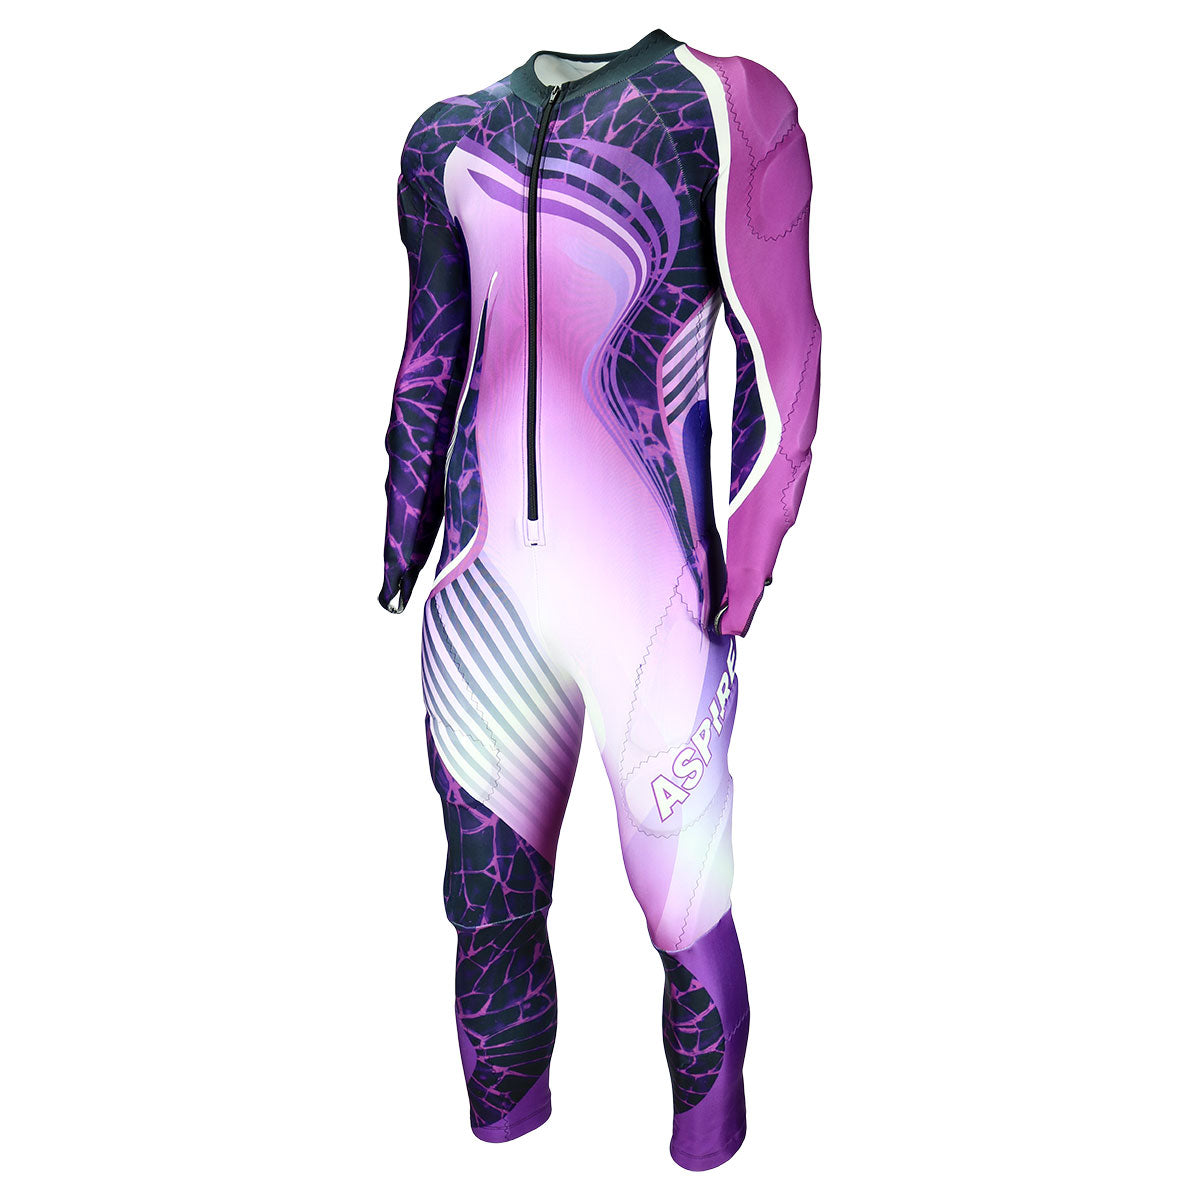 37 GS RACE SUITS ideas | suits, ski racing, skiing